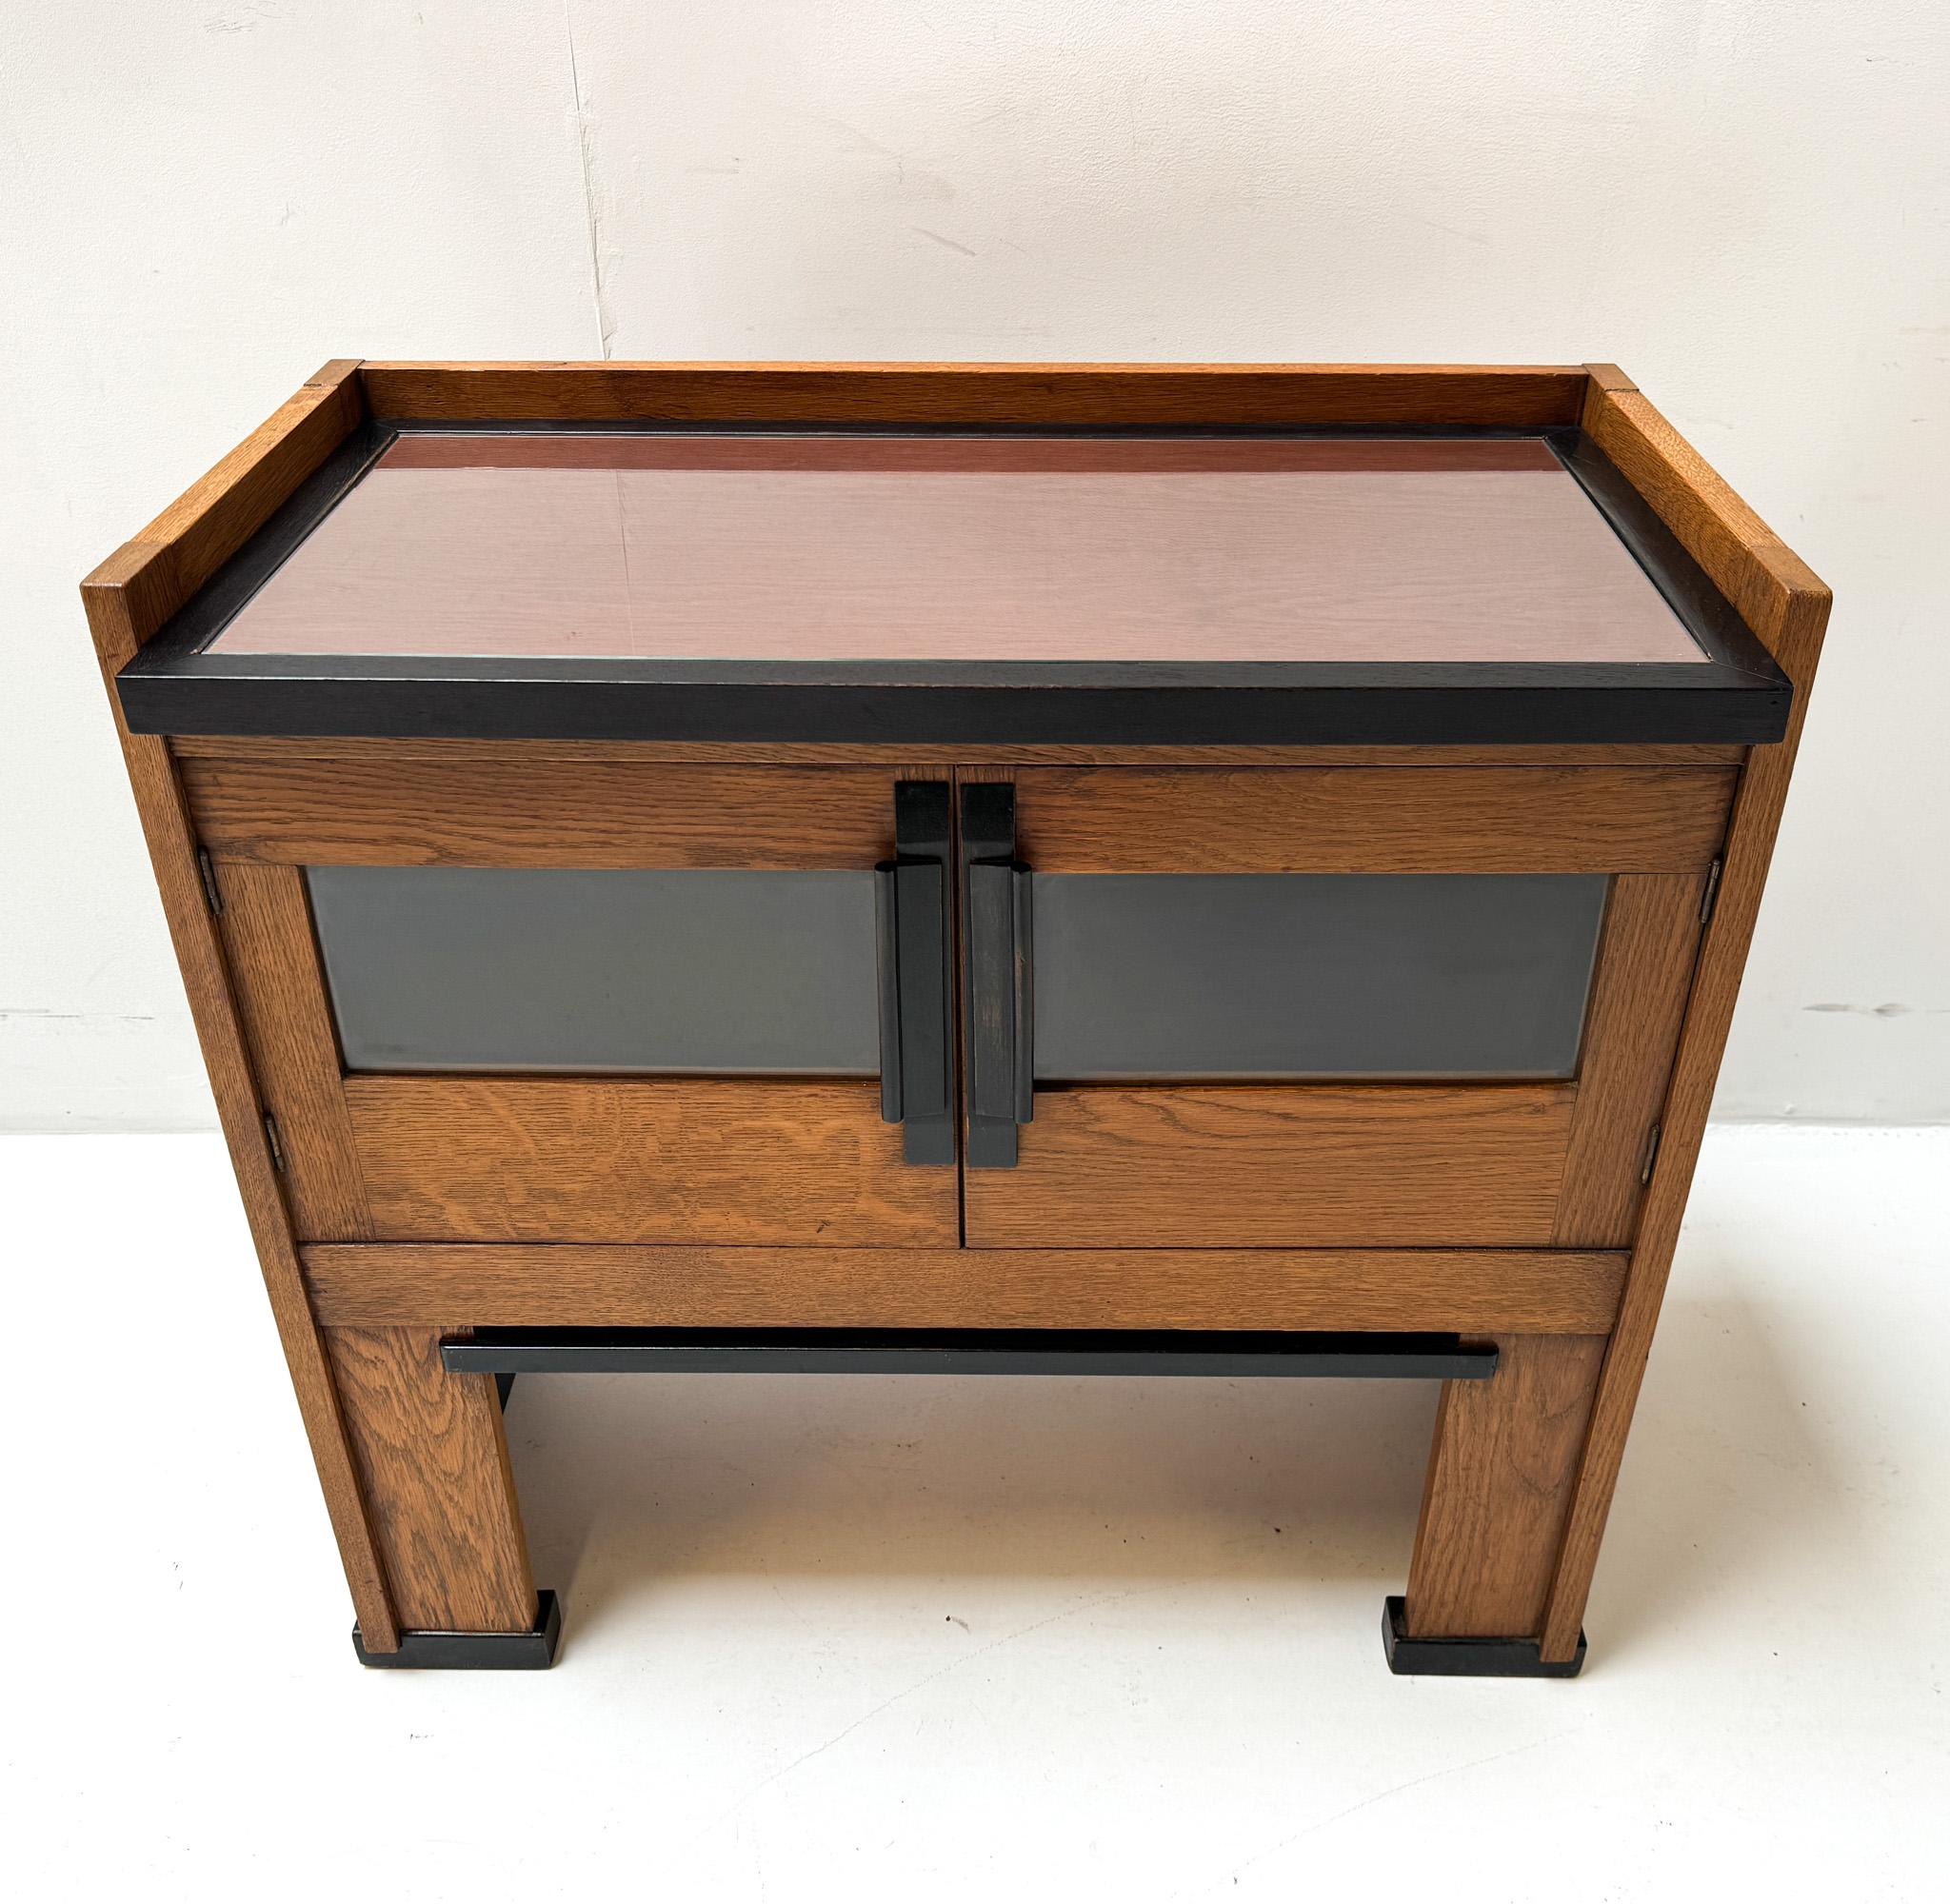 Magnificent and ultra rare Art Deco Modernist cabinet.
Design by Jan Brunott.
Striking Dutch design from the 1920s.
Solid oak with original serving tray.
Original black lacquered handles on both doors.
 In very good original condition with minor